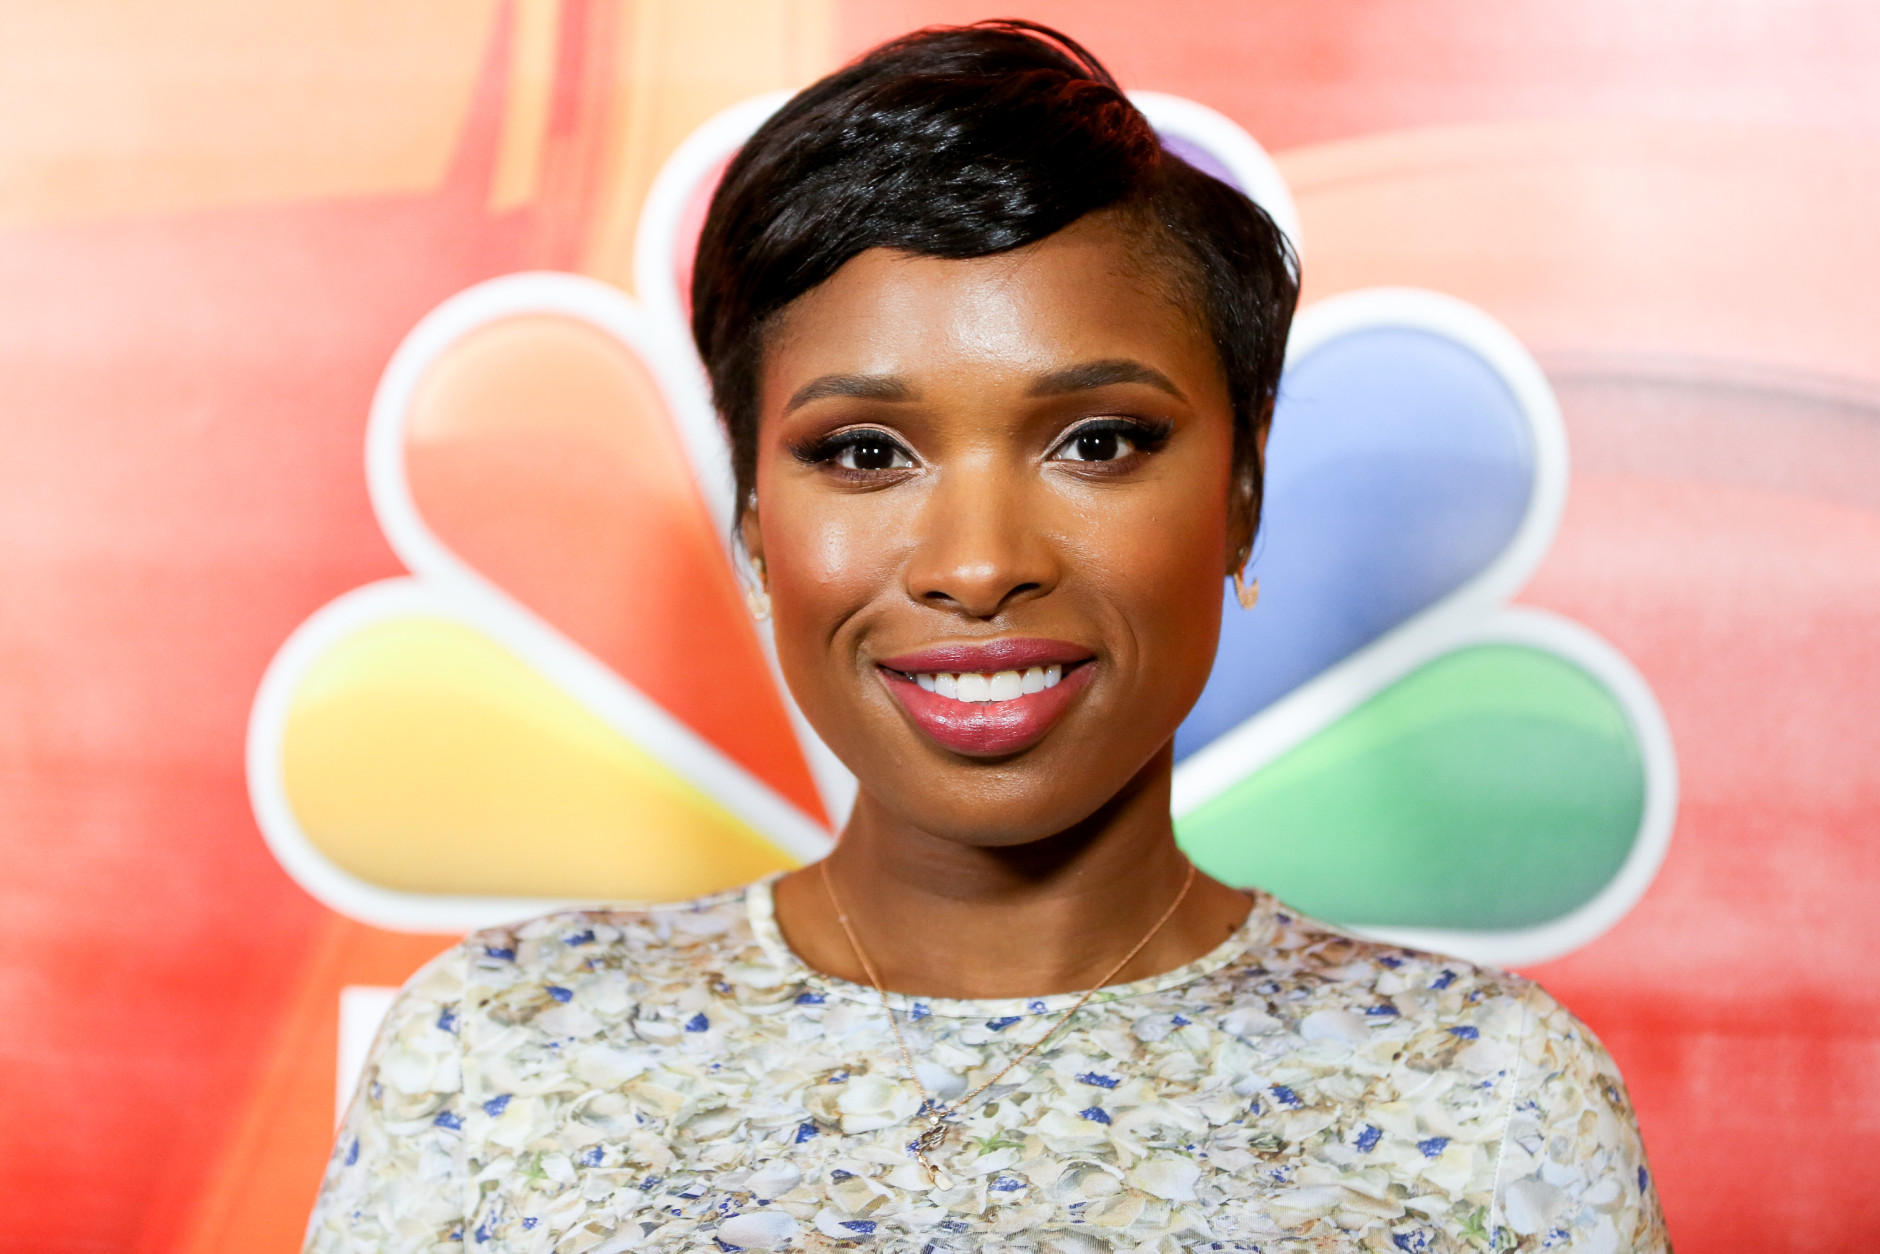 Jennifer Hudson, a cast member in the television special "Hairspray Live!," arrives at the NBCUniversal Television Critics Association summer press tour on Tuesday, Aug. 2, 2016, in Beverly Hills, Calif. (Photo by Rich Fury/Invision/AP)